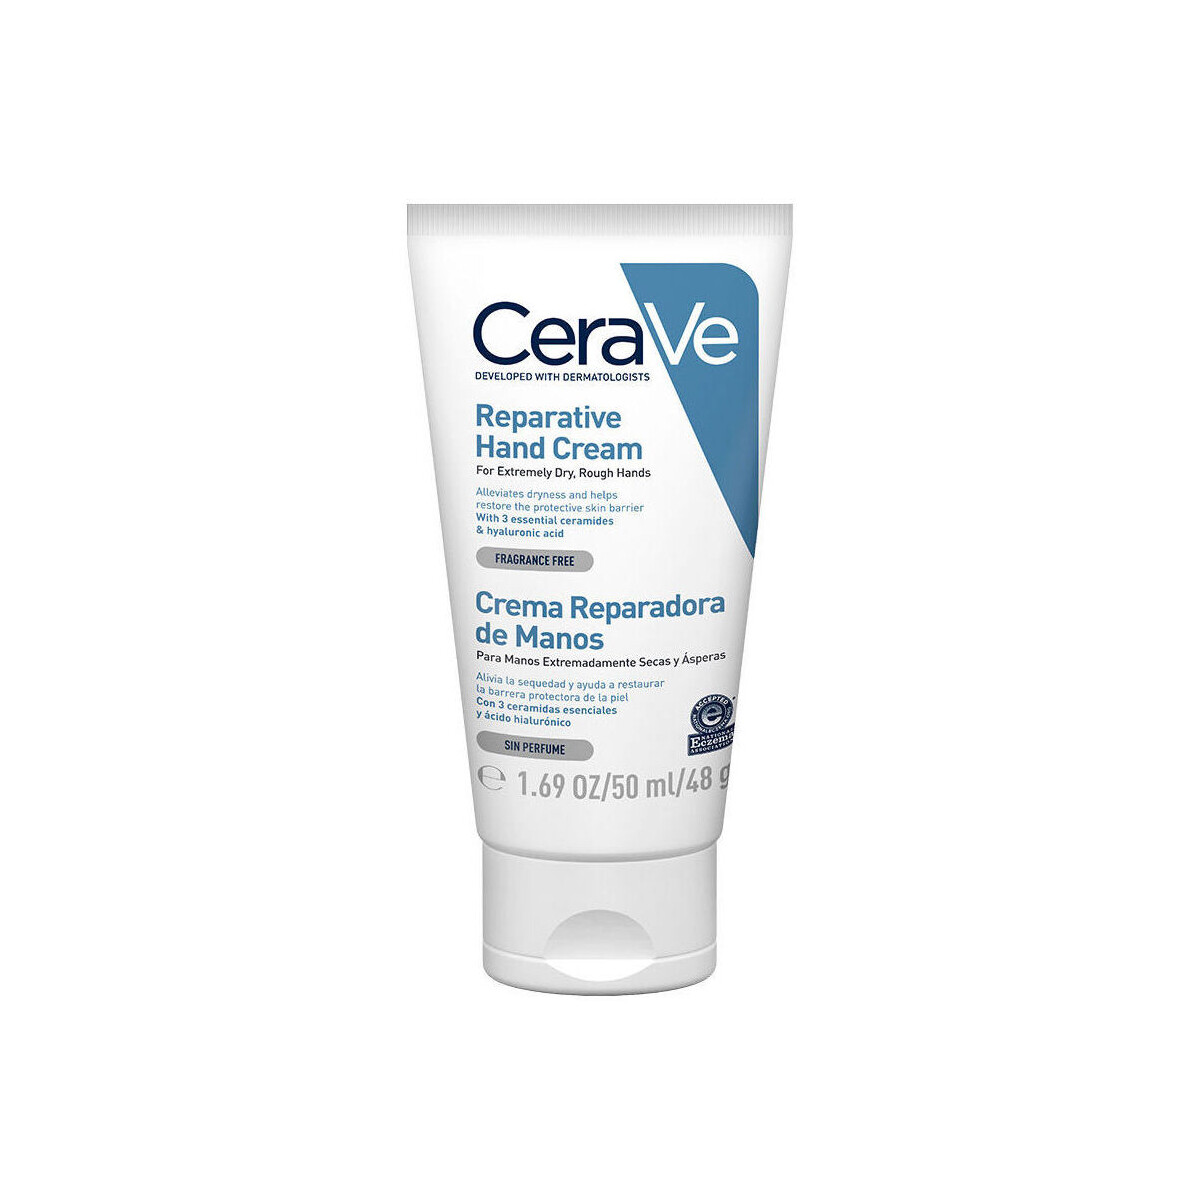 Beauty Damen Hand & Fusspflege Cerave Reparative Hand Cream For Extremely Dry, Rough Hands 